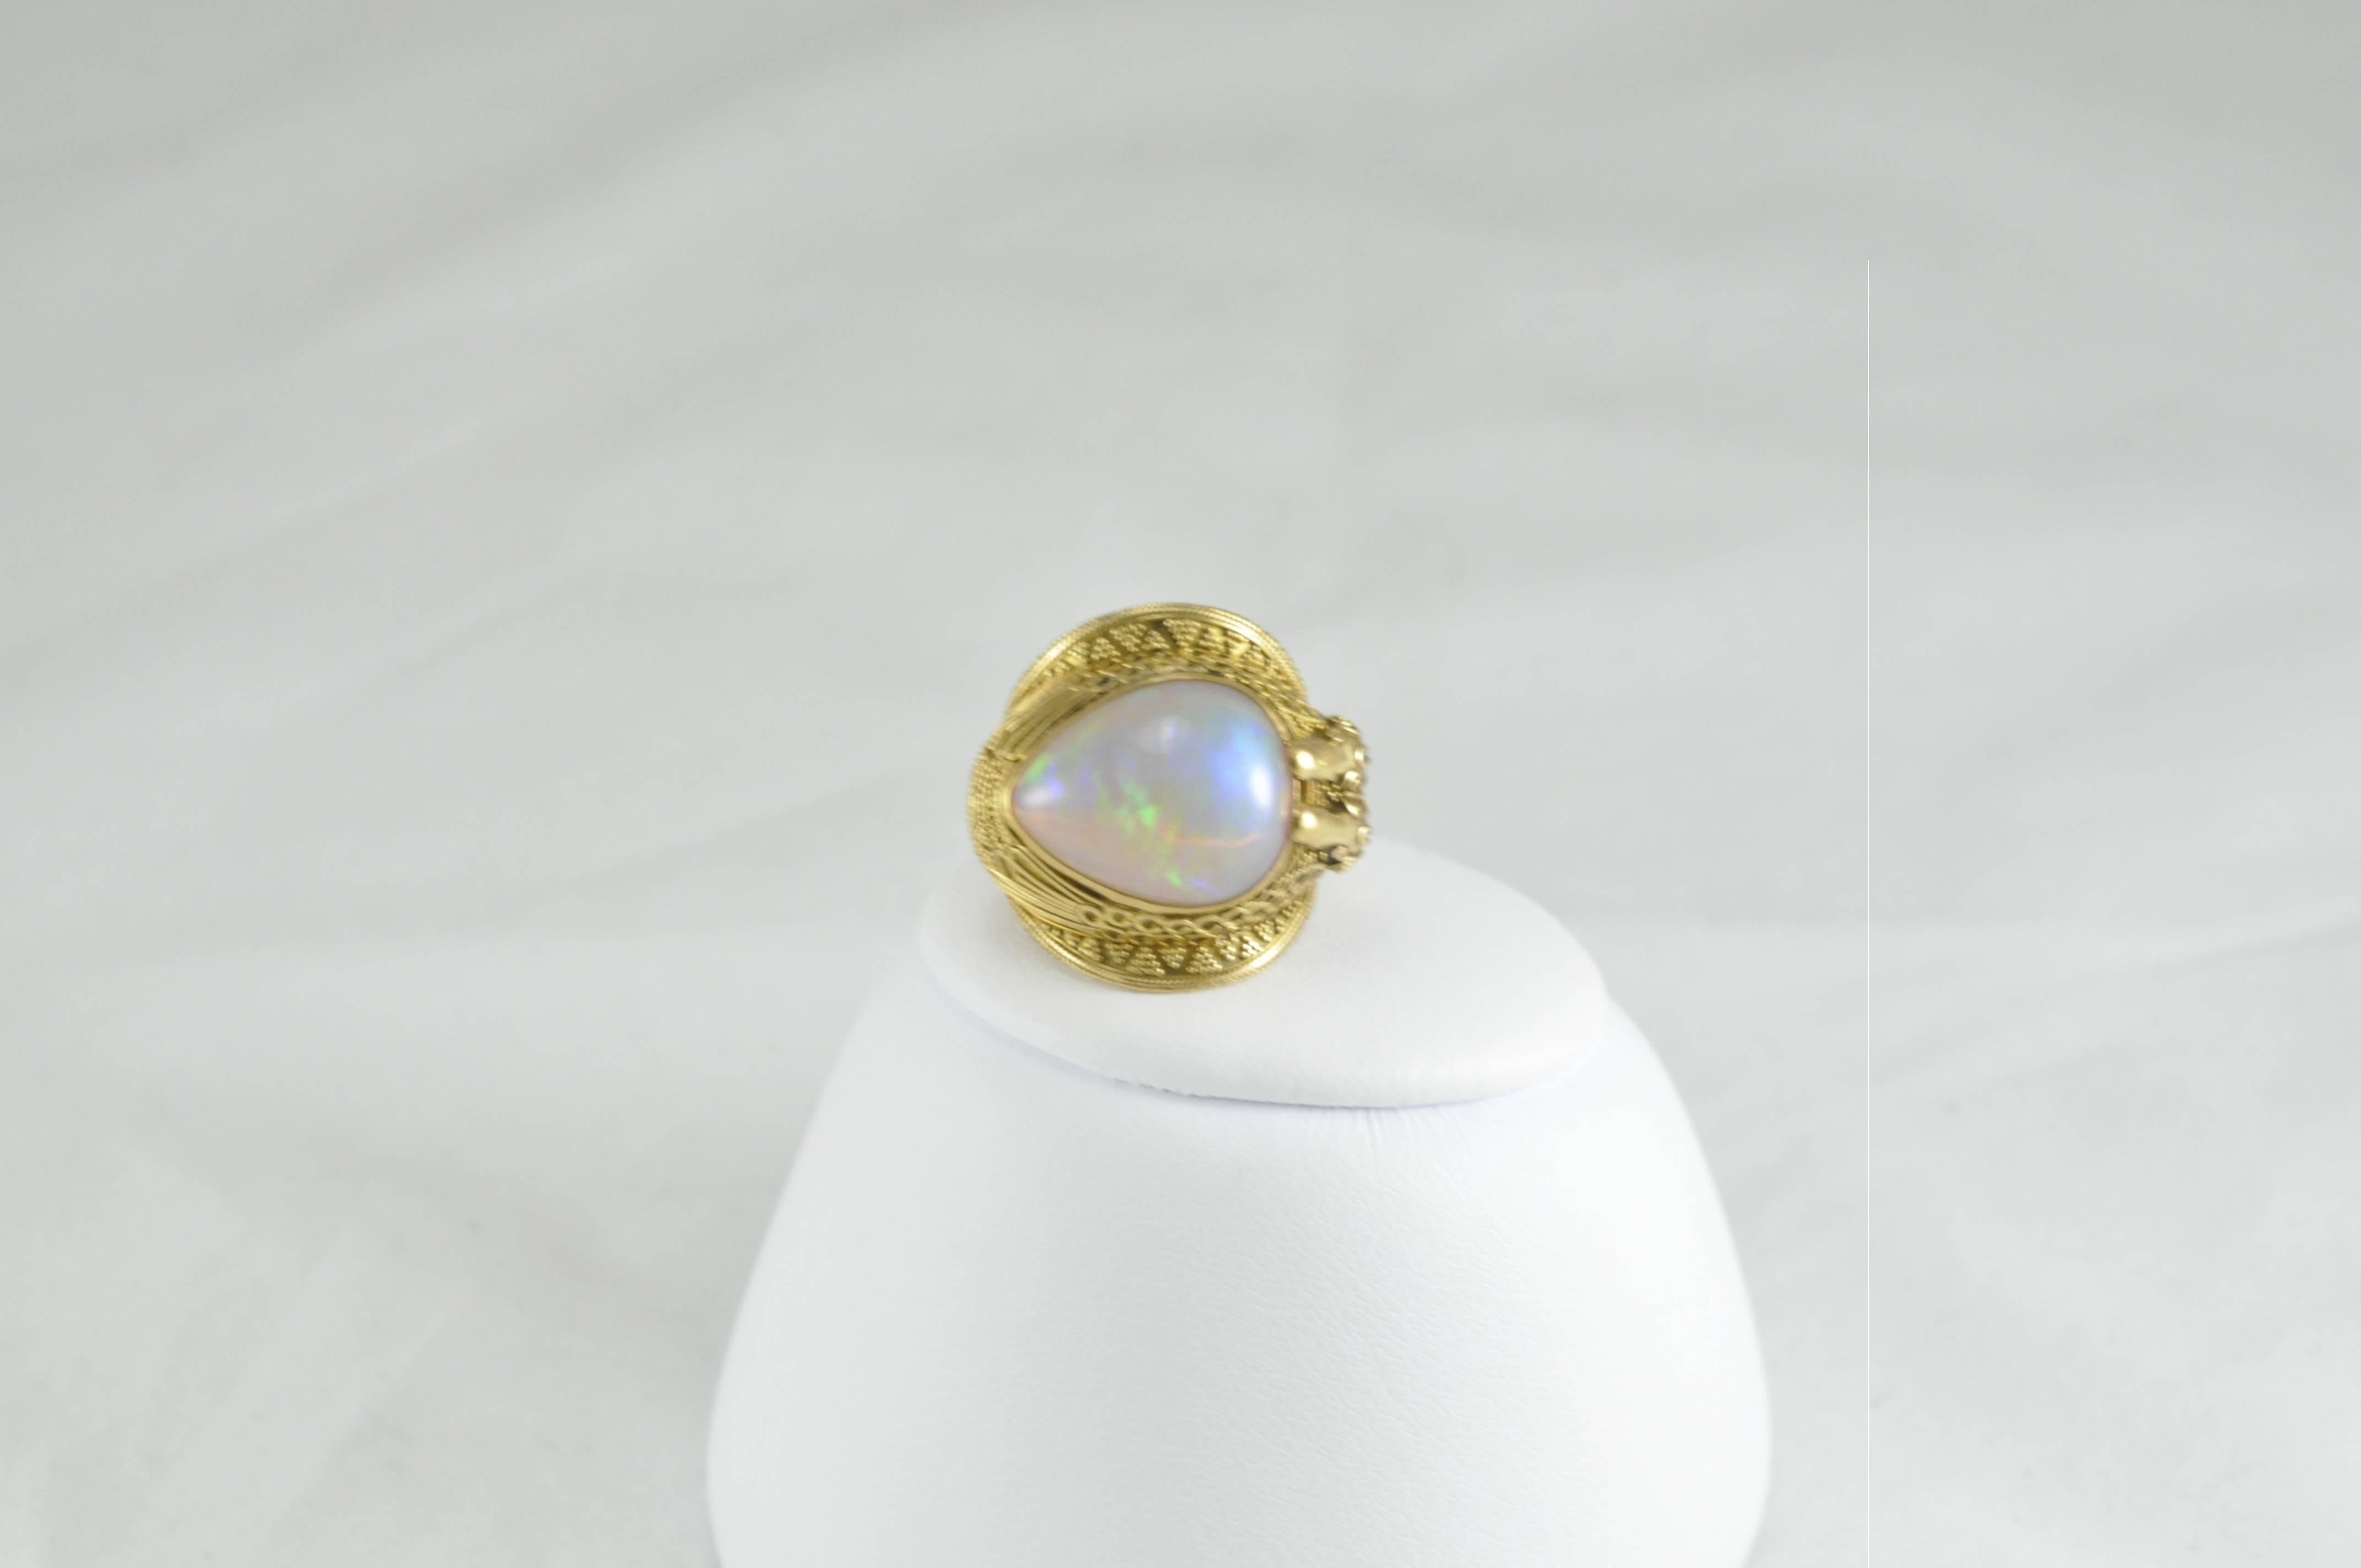 Signature Carolyn Tyler Ring with 22k Gold, and 9ct Ethiopian Opal.  Size 7.5.  The ring is stamped C Tyler, INDONESIA, 22K.